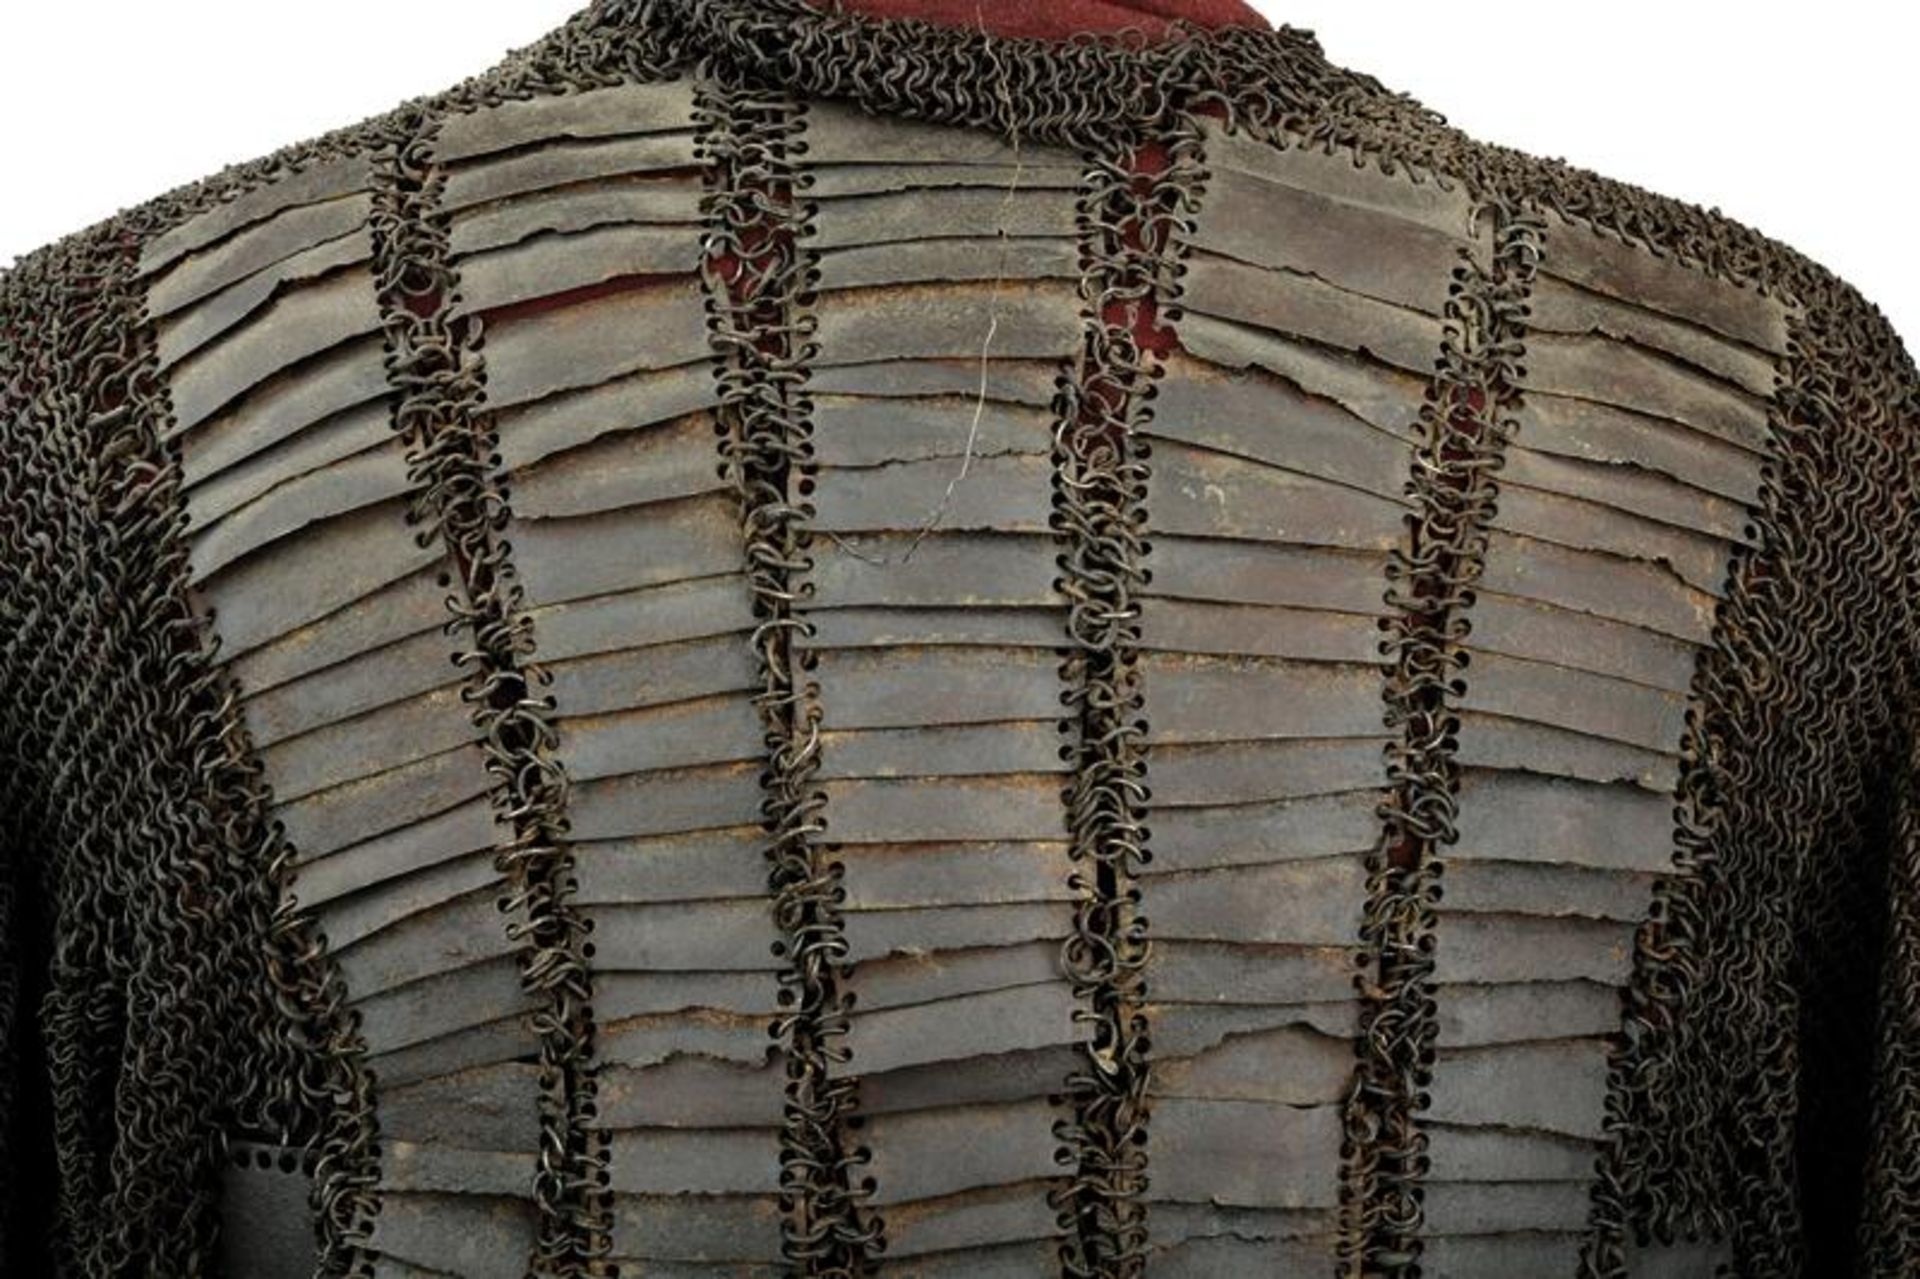 A chain mail combat armour - Image 6 of 6